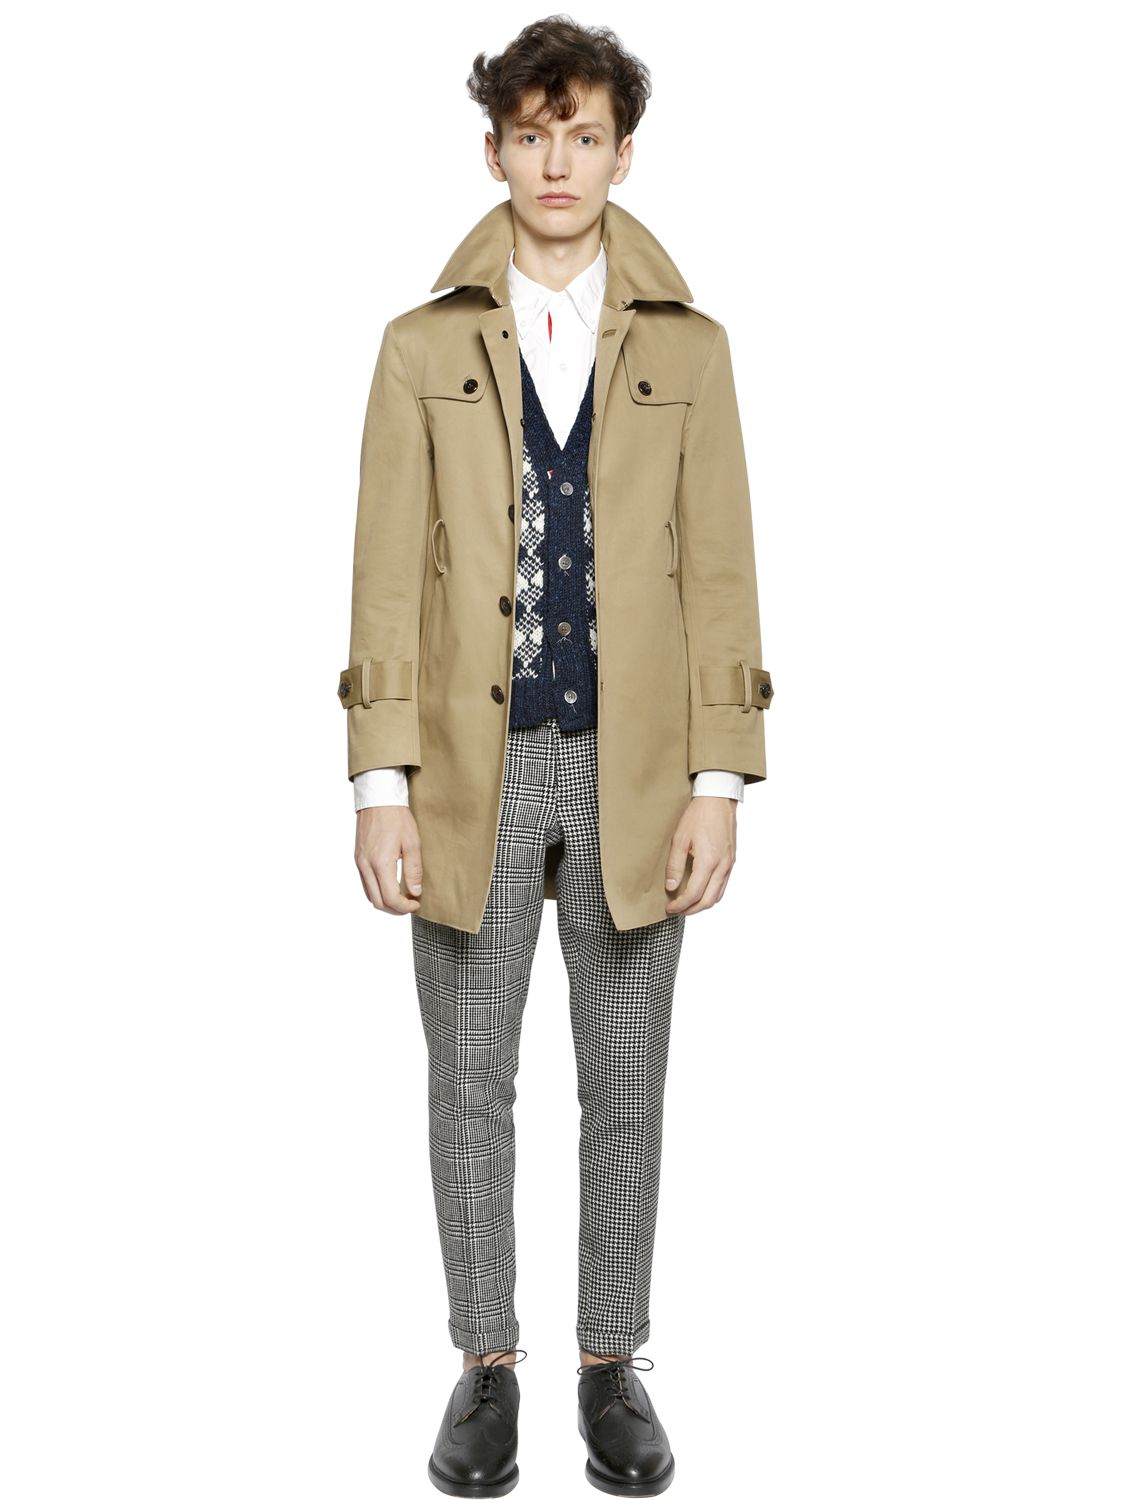 Thom Browne Cotton Mac Trench Coat in Natural for Men - Lyst